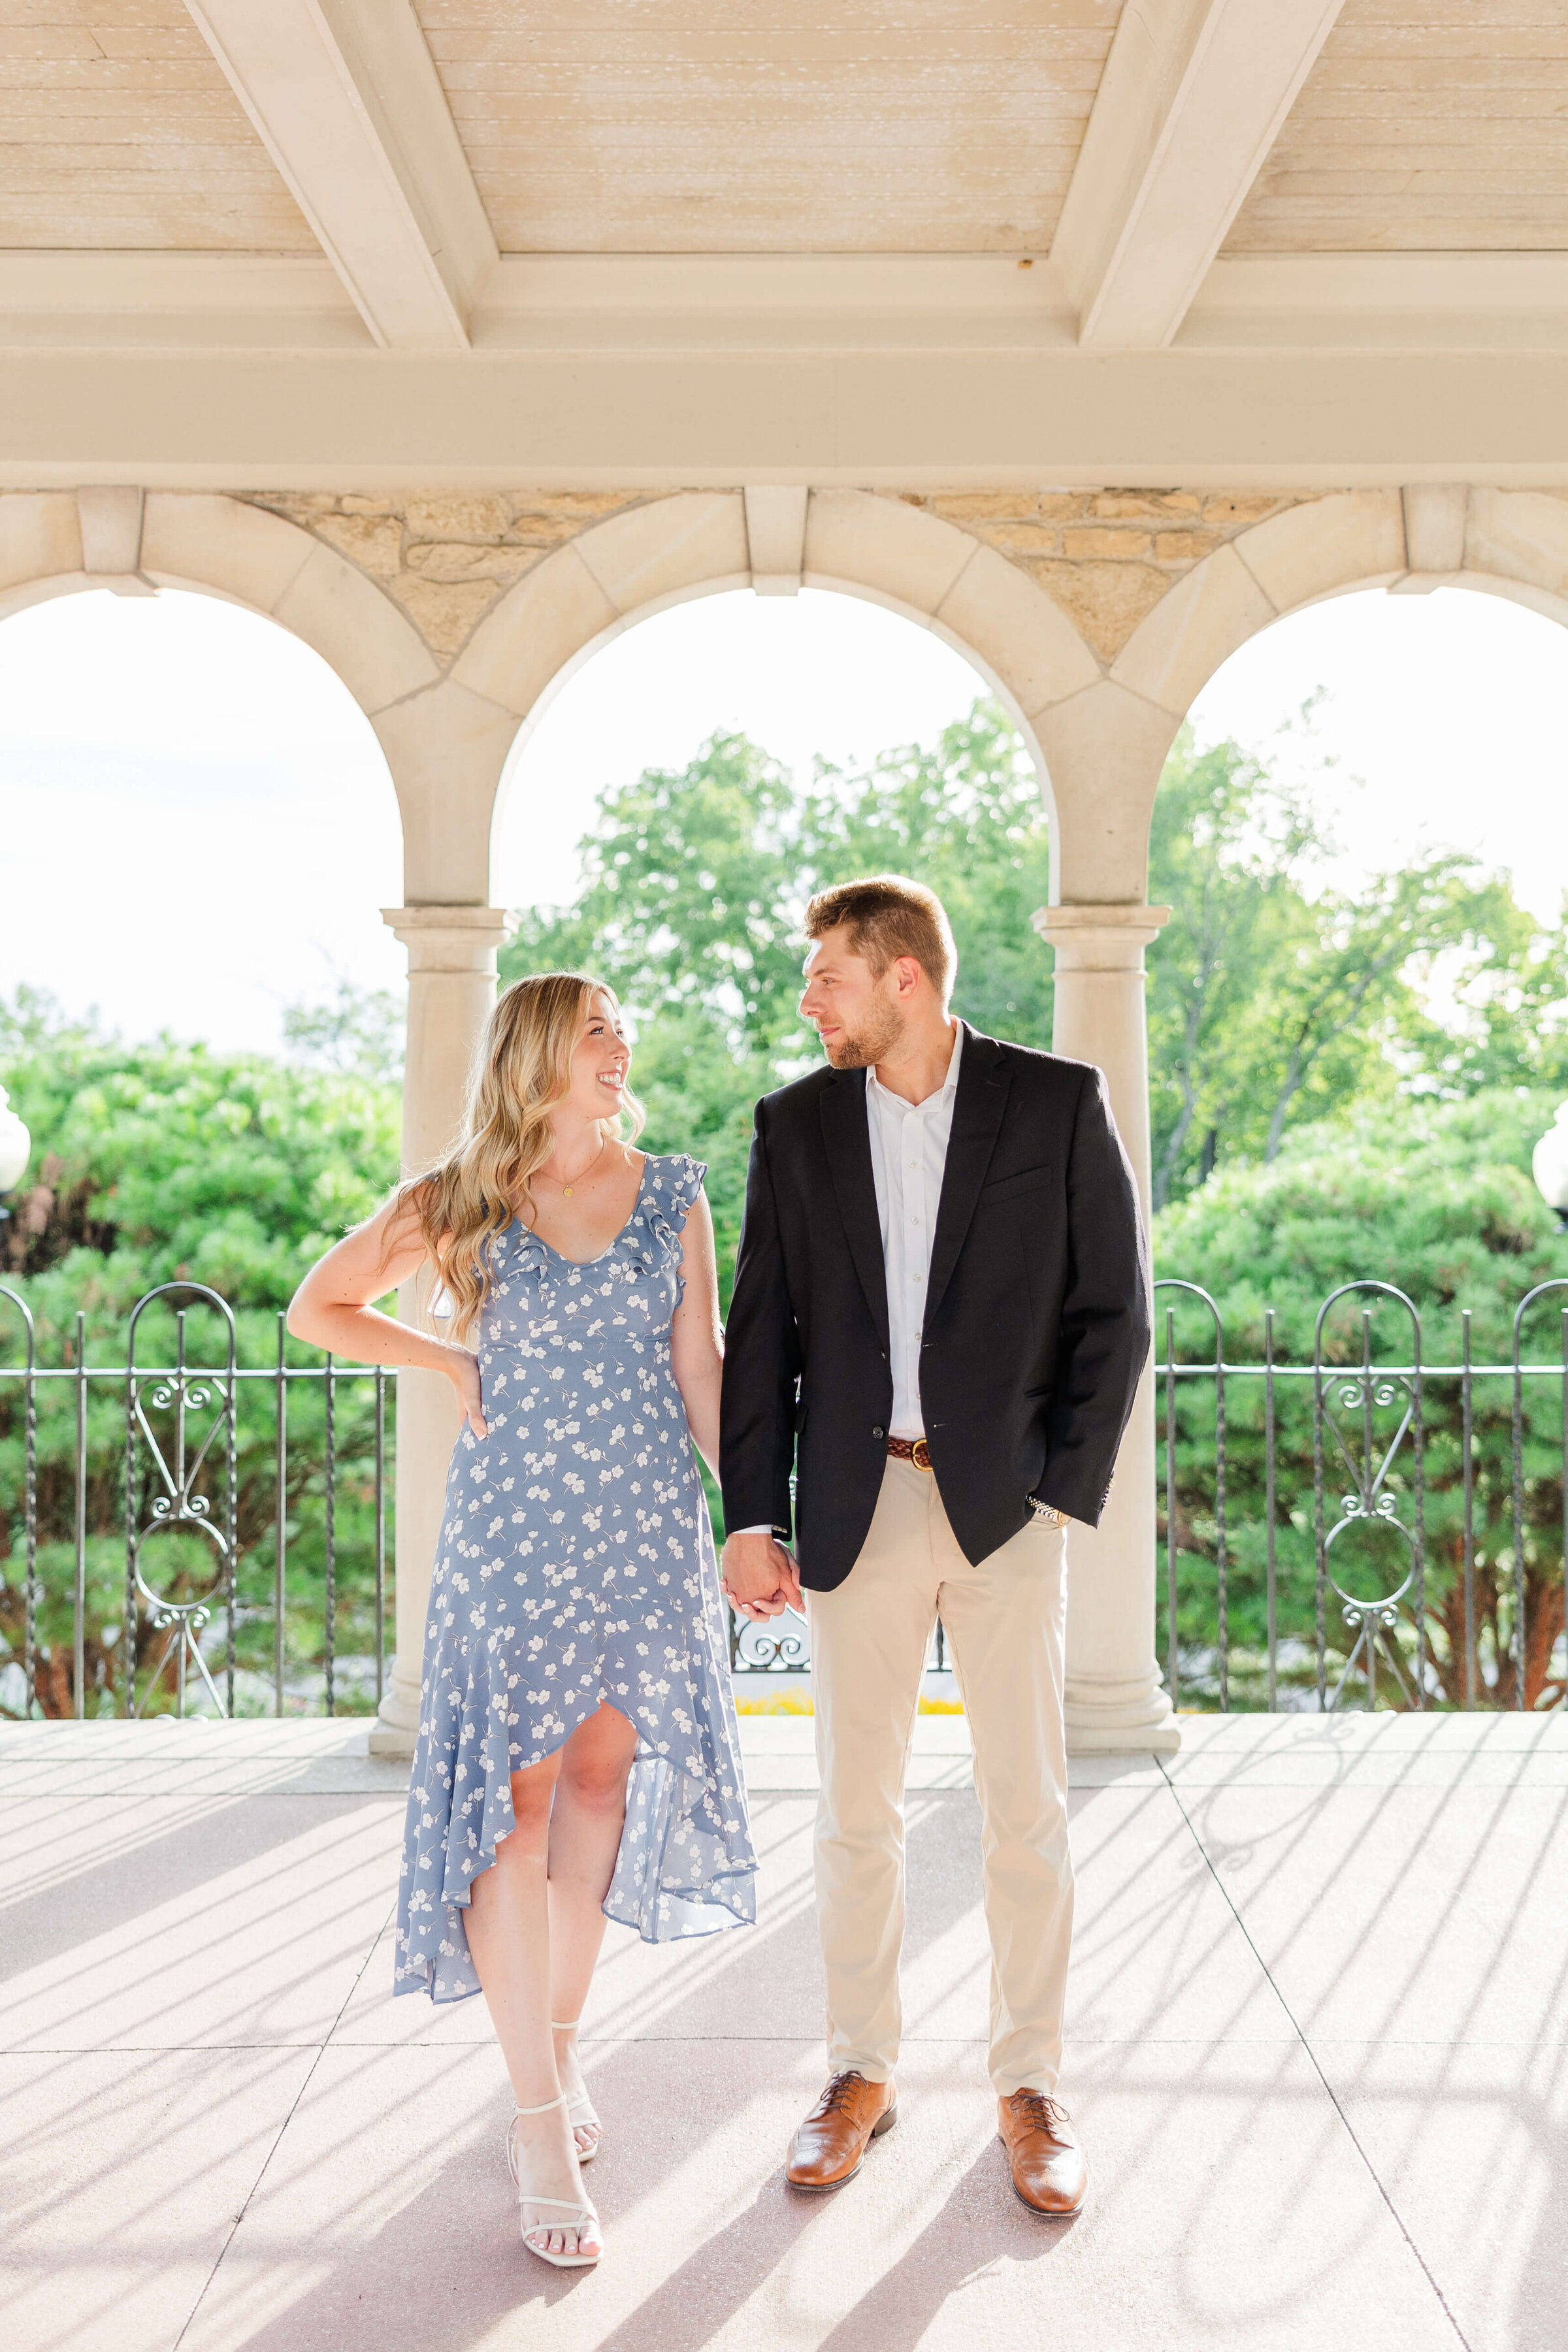 A woman in a light blue dress and a man in light pants and a dark jacket stand next to each other holding hands and smiling at each other. They are standing in a white building where the sun is glowing in and there are green trees in back of them. Taken by a cincinnati wedding photographer.